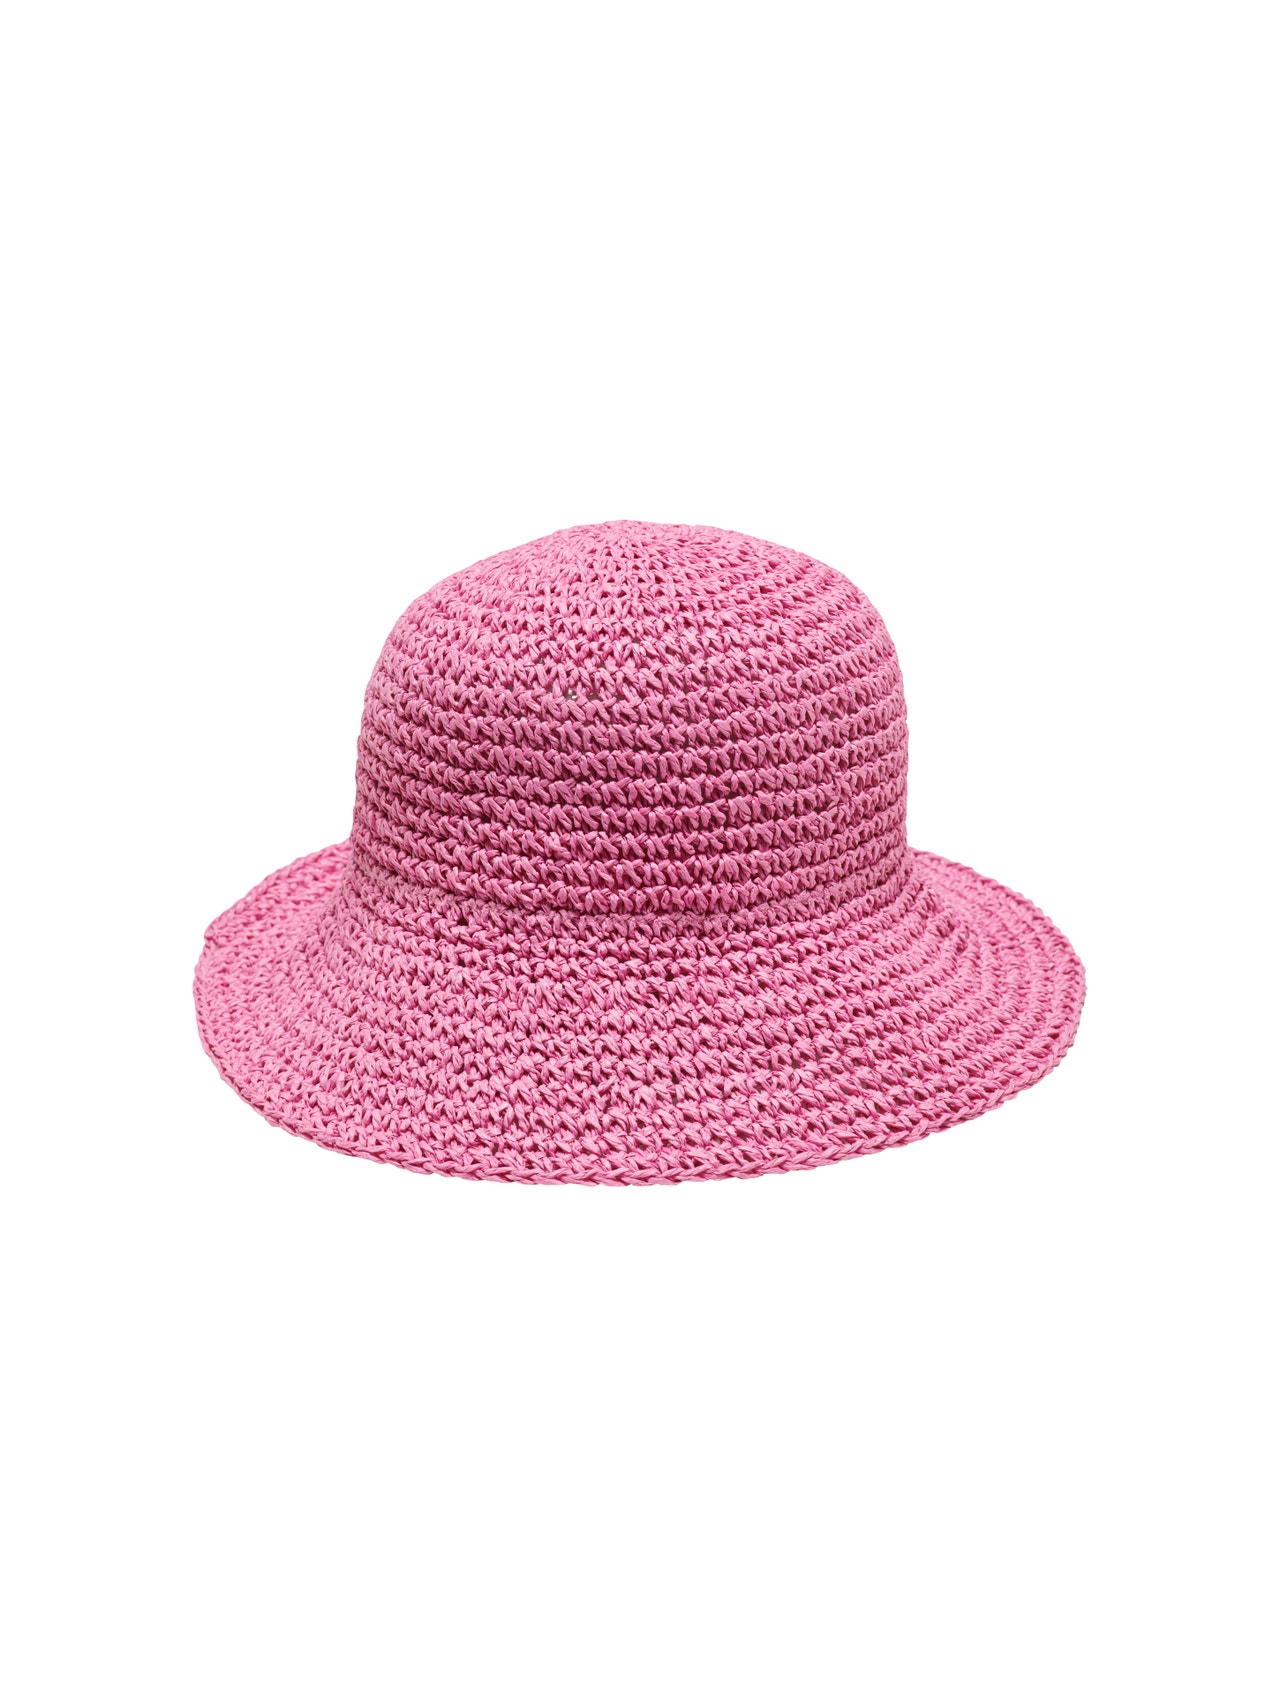 ONLY Beach hat -Knockout Pink - 15313321